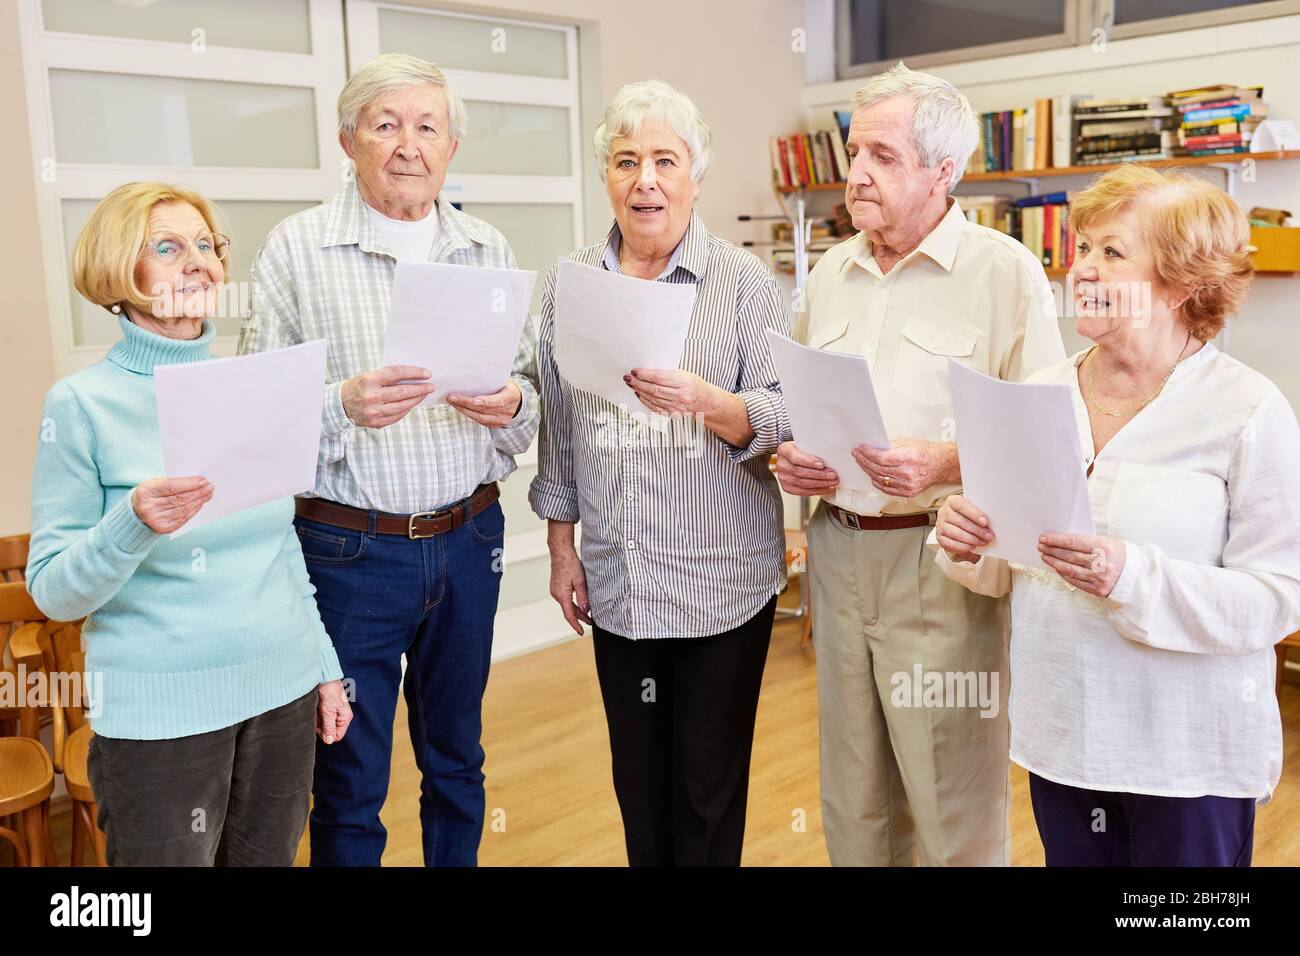 Group of seniors with dementia singing together in a choir rehearsal Stock Photo